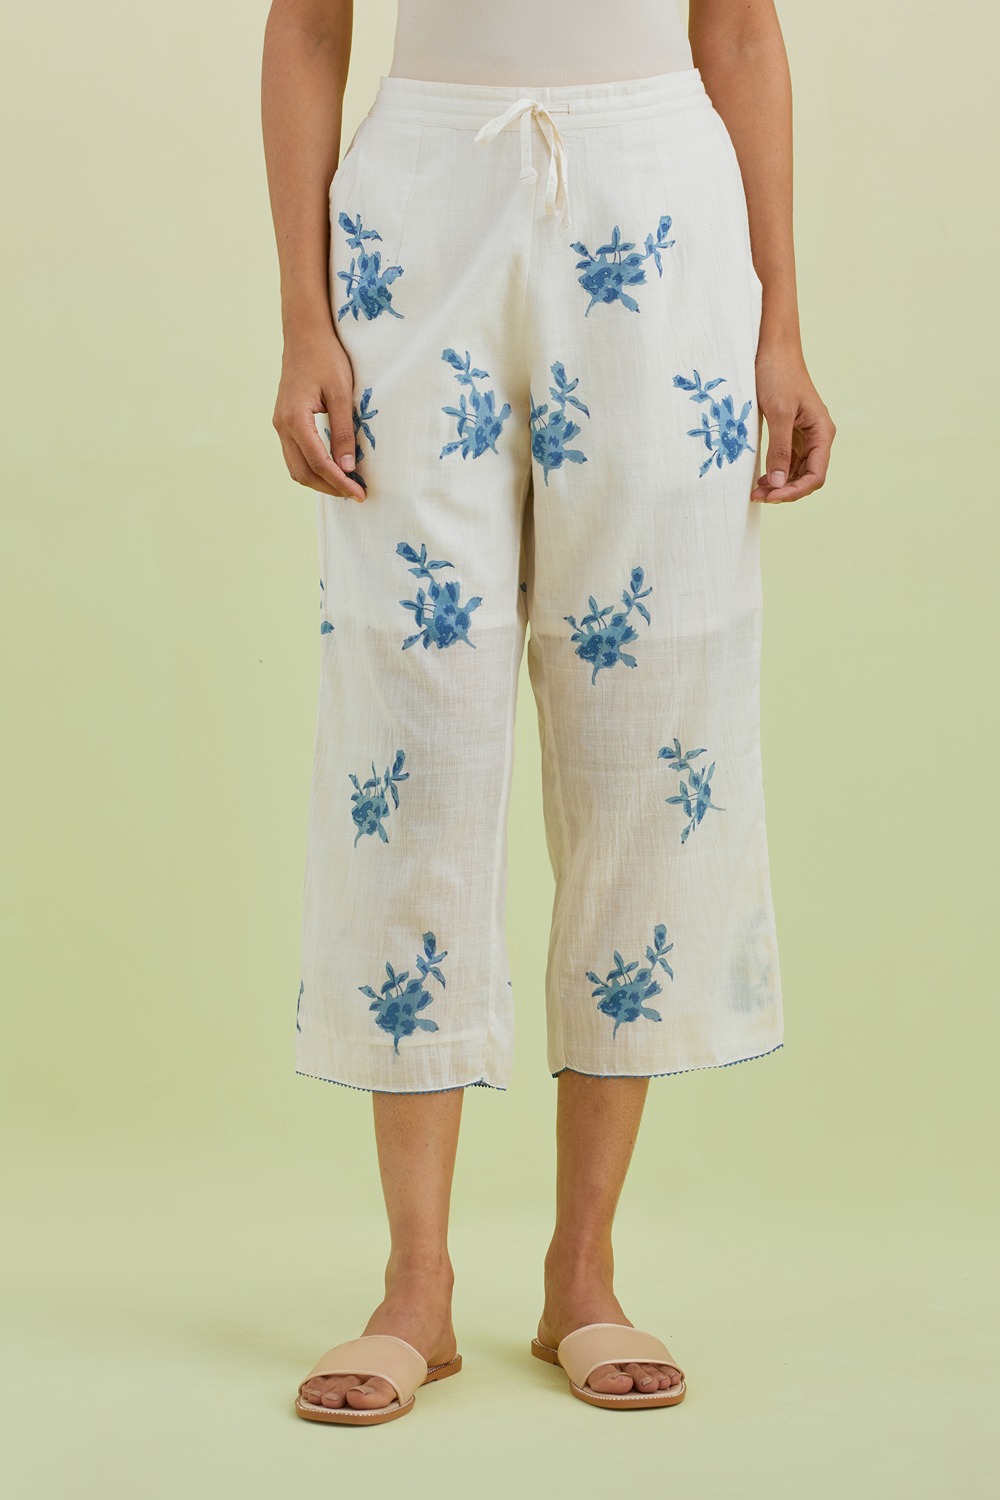 Off White Straight Ankle Length Pants With All-Over Blue Colored Floral Boota Hand-Block Print